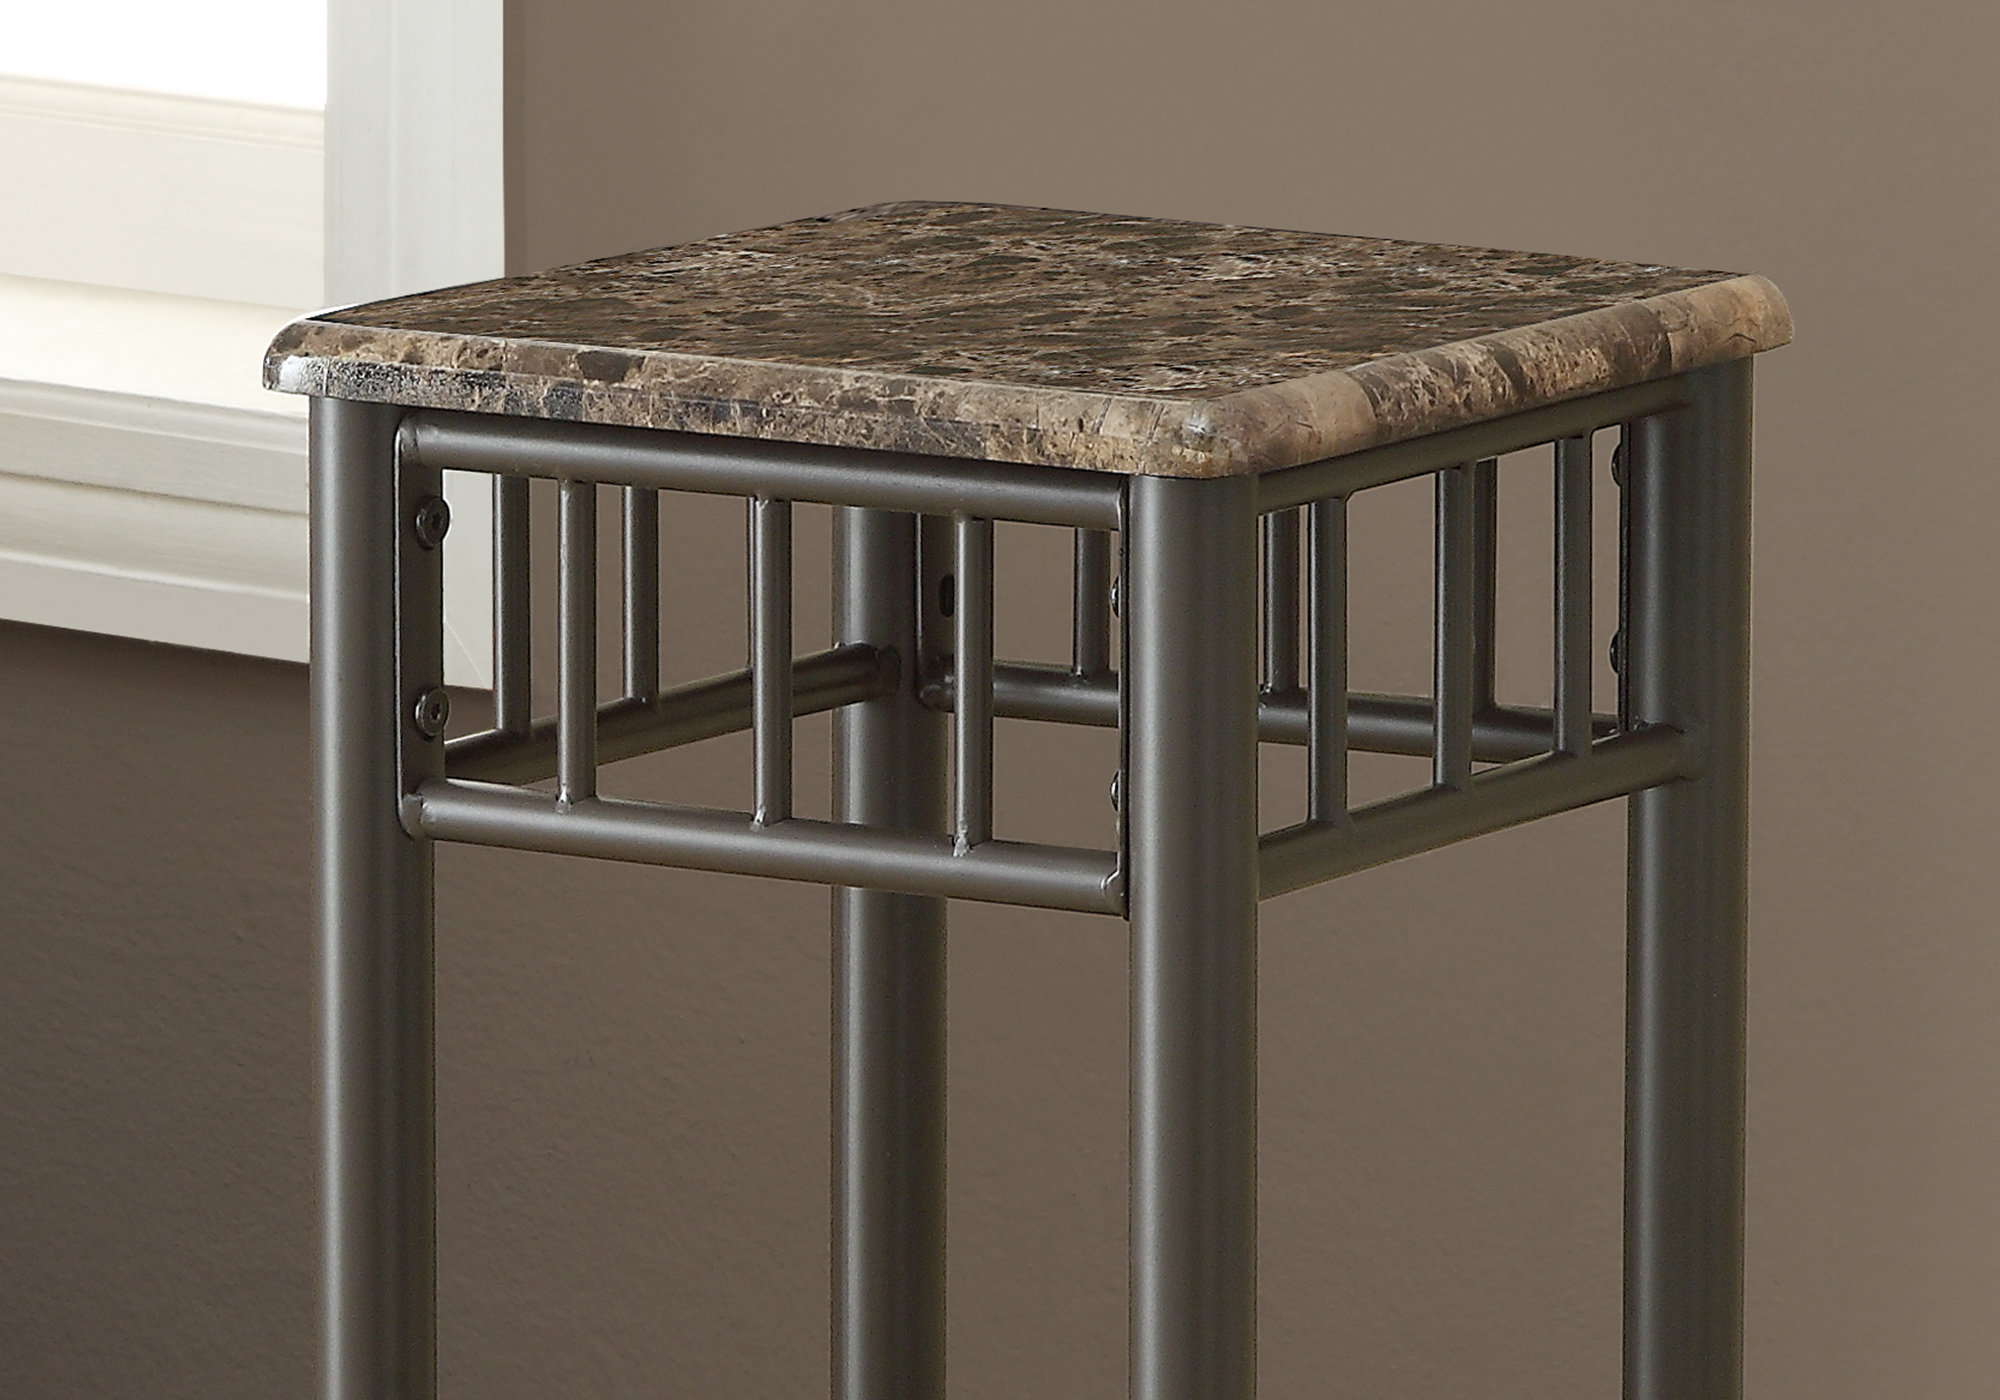 PLANT STAND - CAPPUCCINO MARBLE / BRONZE METAL